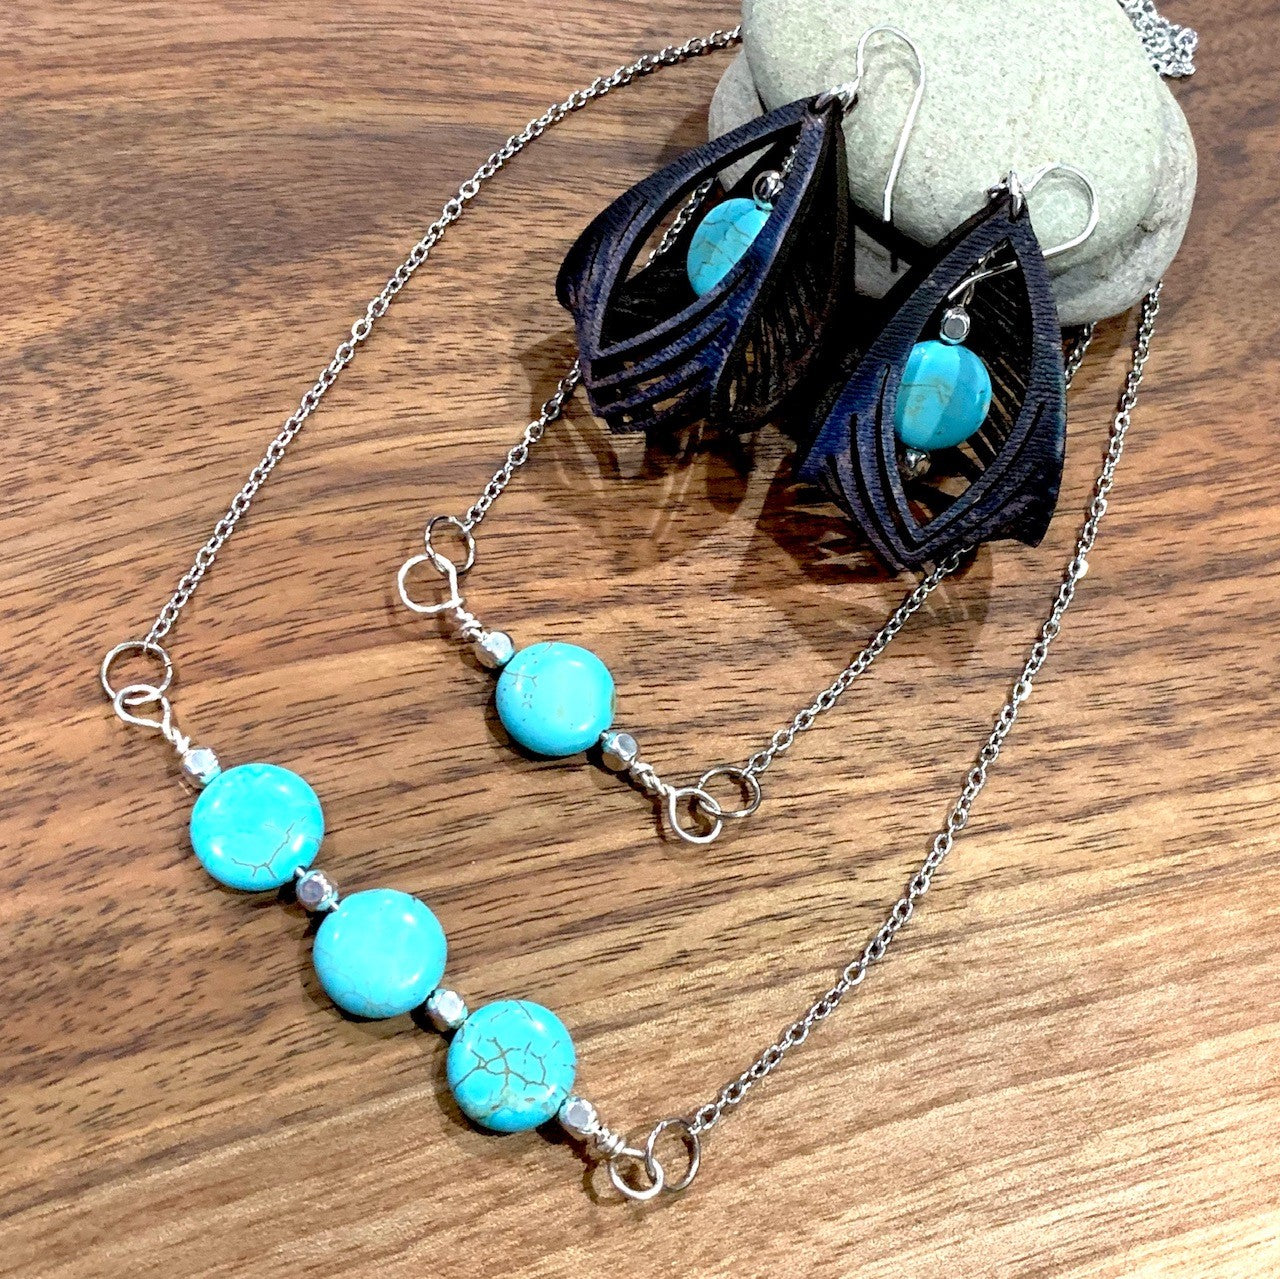 black leather cage earrings with howlite stone and matching pendants